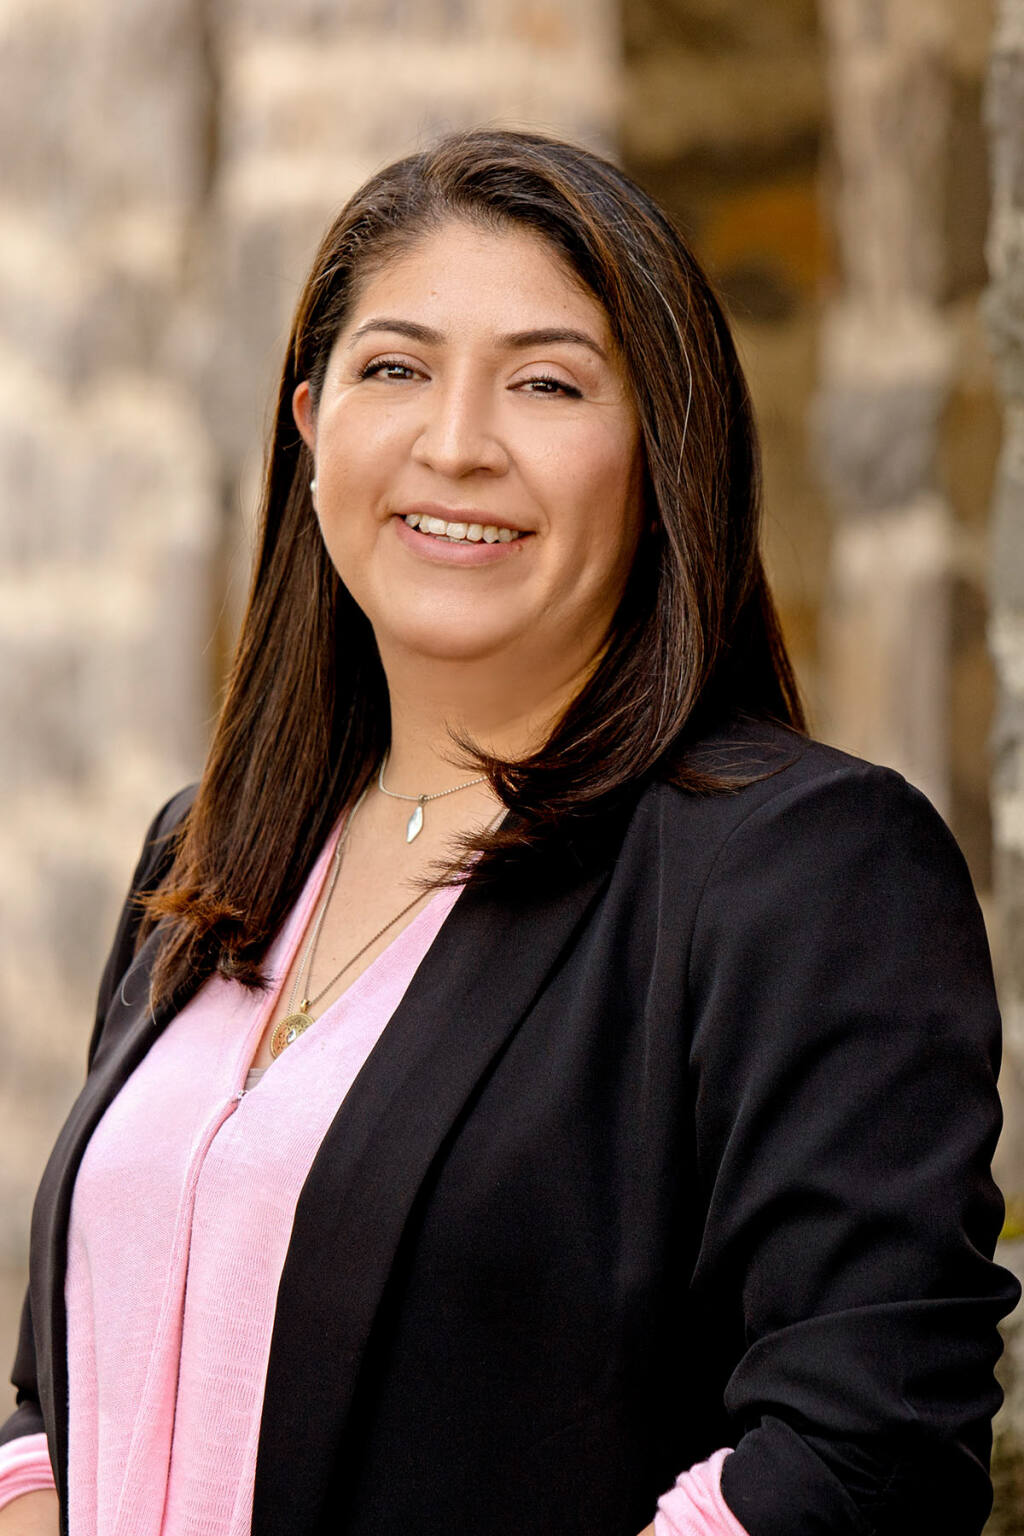 Diana Mendez, 37, a project designer for Auattrocchi Kwok Architects, is a 2023 North Bay Business Journal Forty Under 40 Award winner. The winners will be recognized Tuesday, April 25 at an event from four to 6 p.m. at Saralee and Richards Barn at the Sonoma County Fairgrounds.